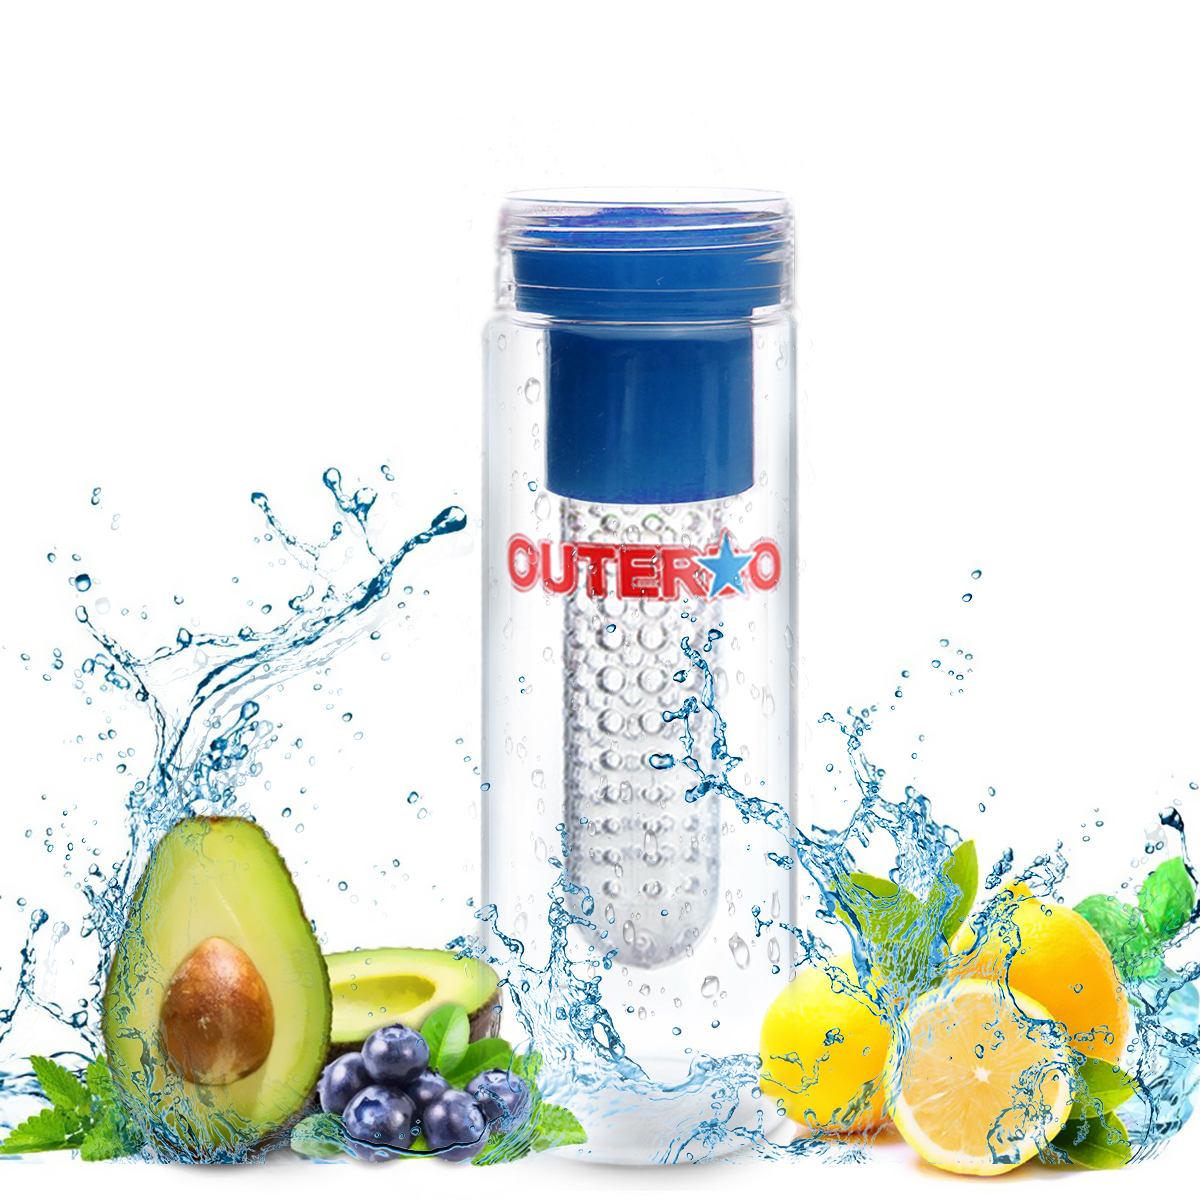 OUTERDO-780ml-Plastic-Water-Bottles-Filter-Water-Cups-Large-Capacity-Fruit-Cups-Outdoor-Sports-Cups--1884810-3